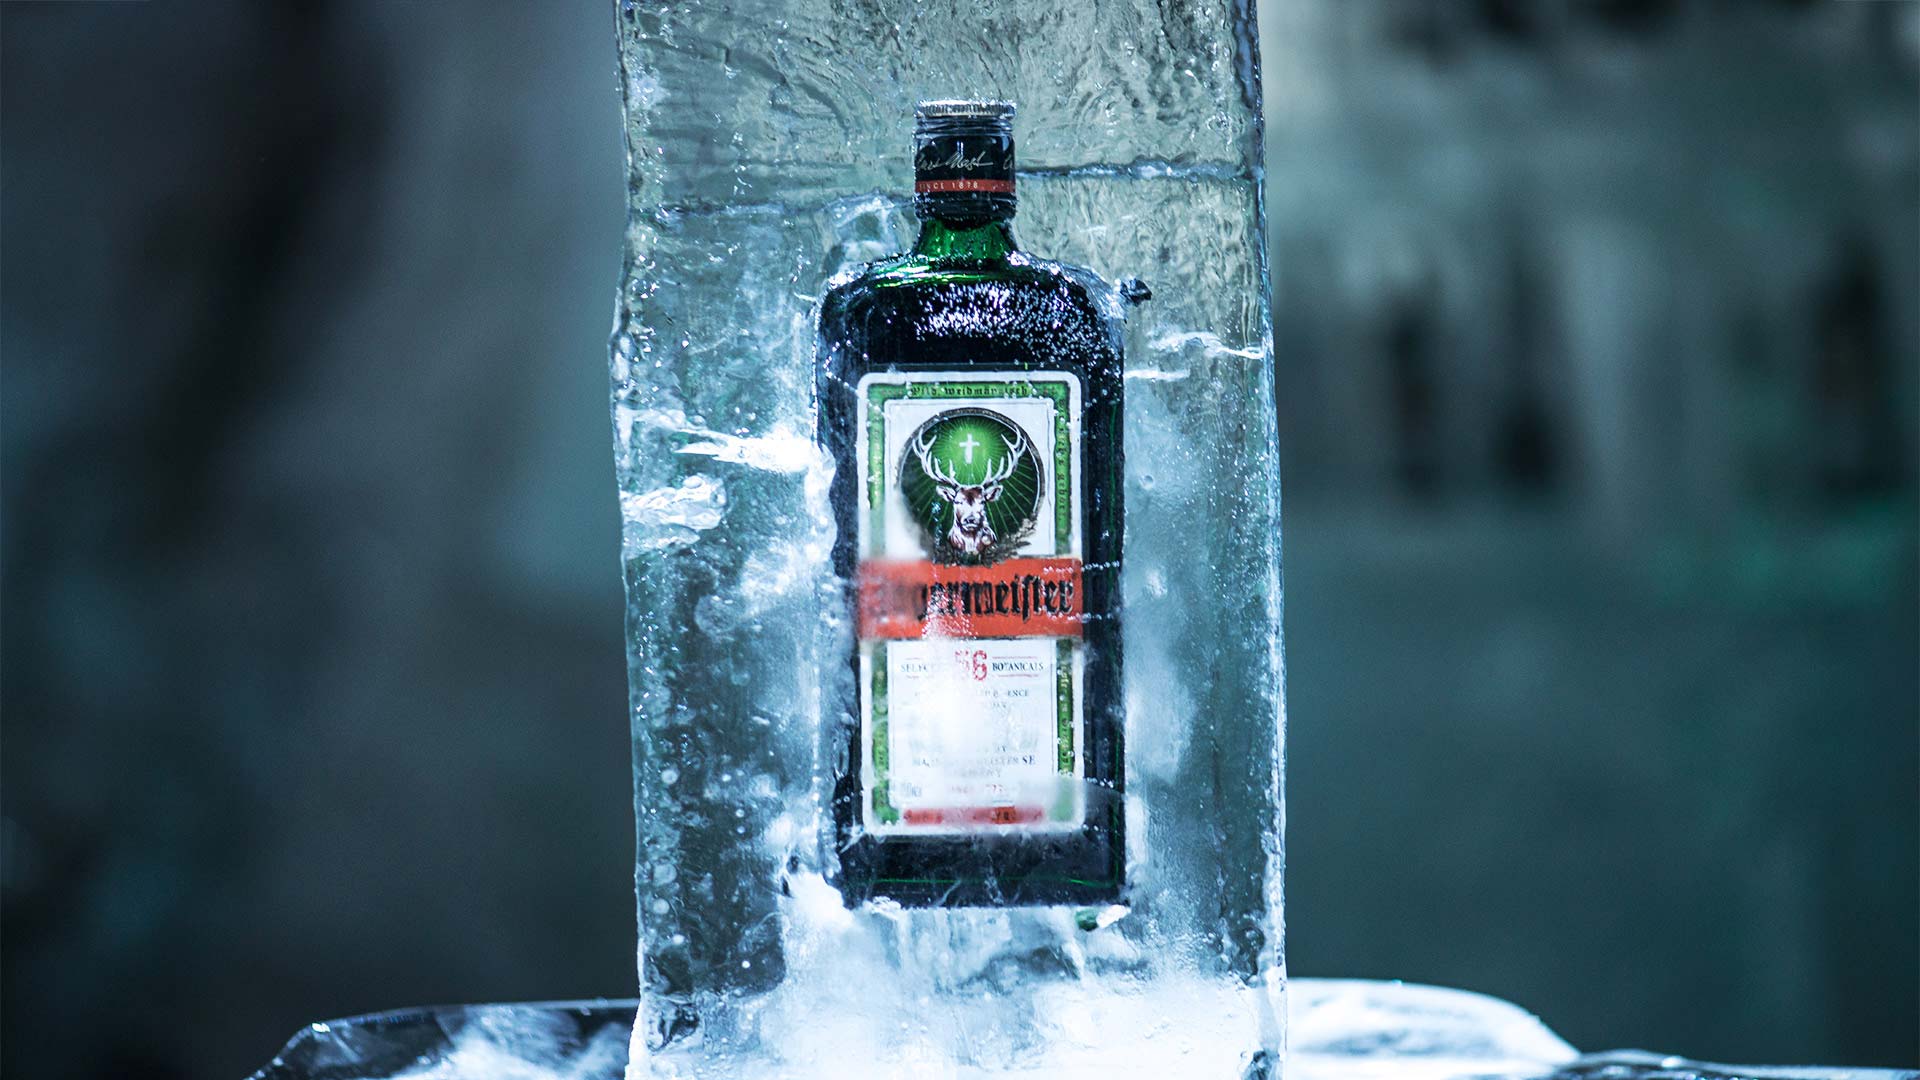 Download Latest HD Wallpapers of , Products, Jägermeister